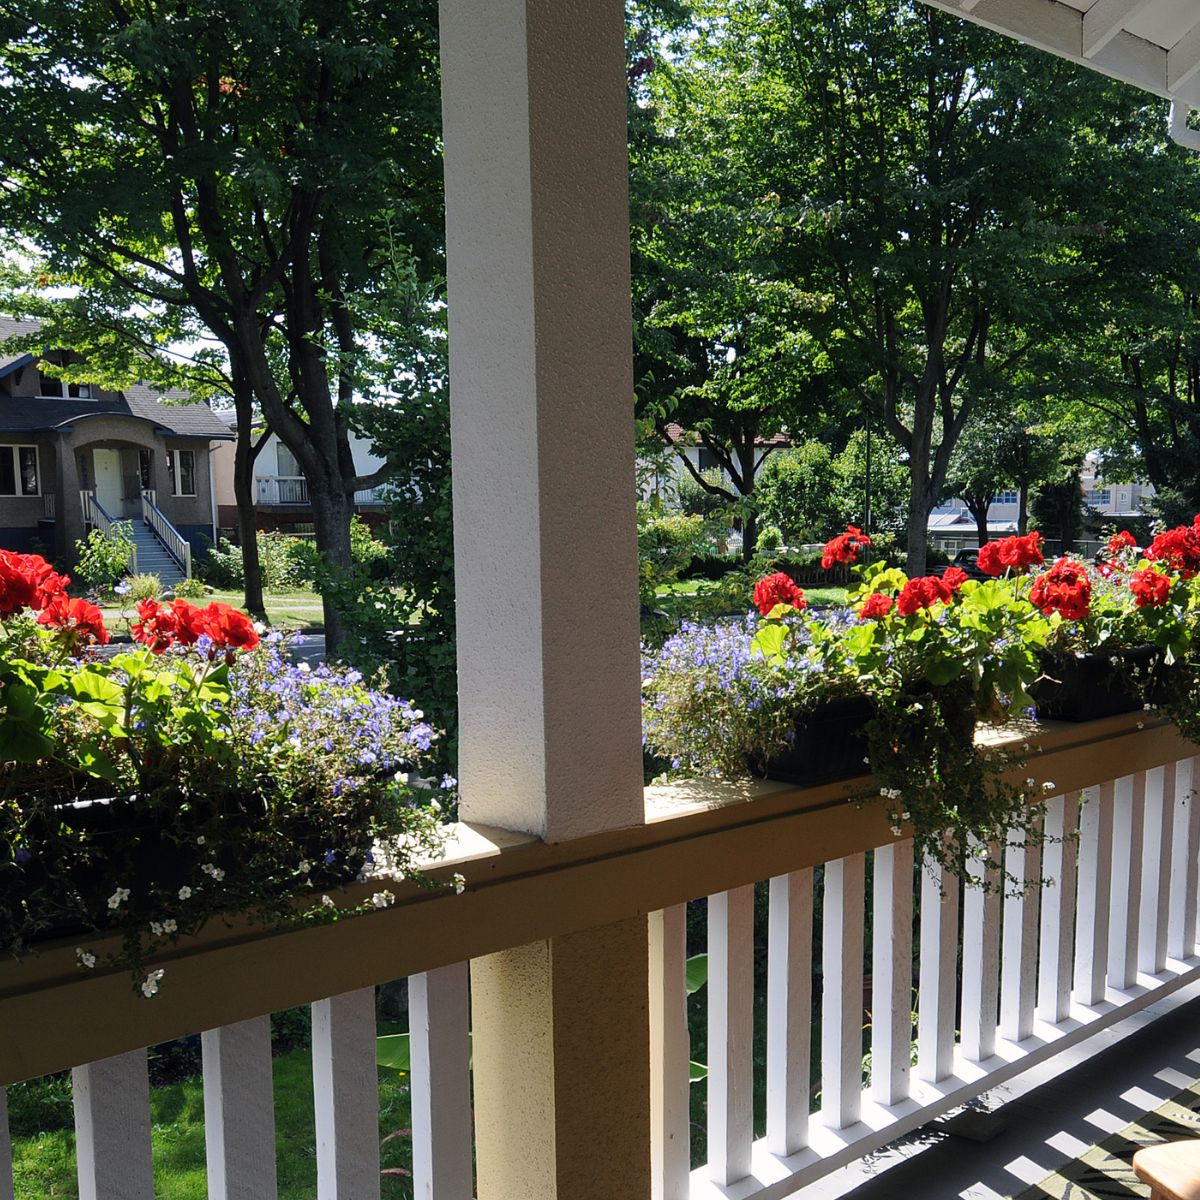 window boxes sitting on the porch railings, filled with red and blue flowers.